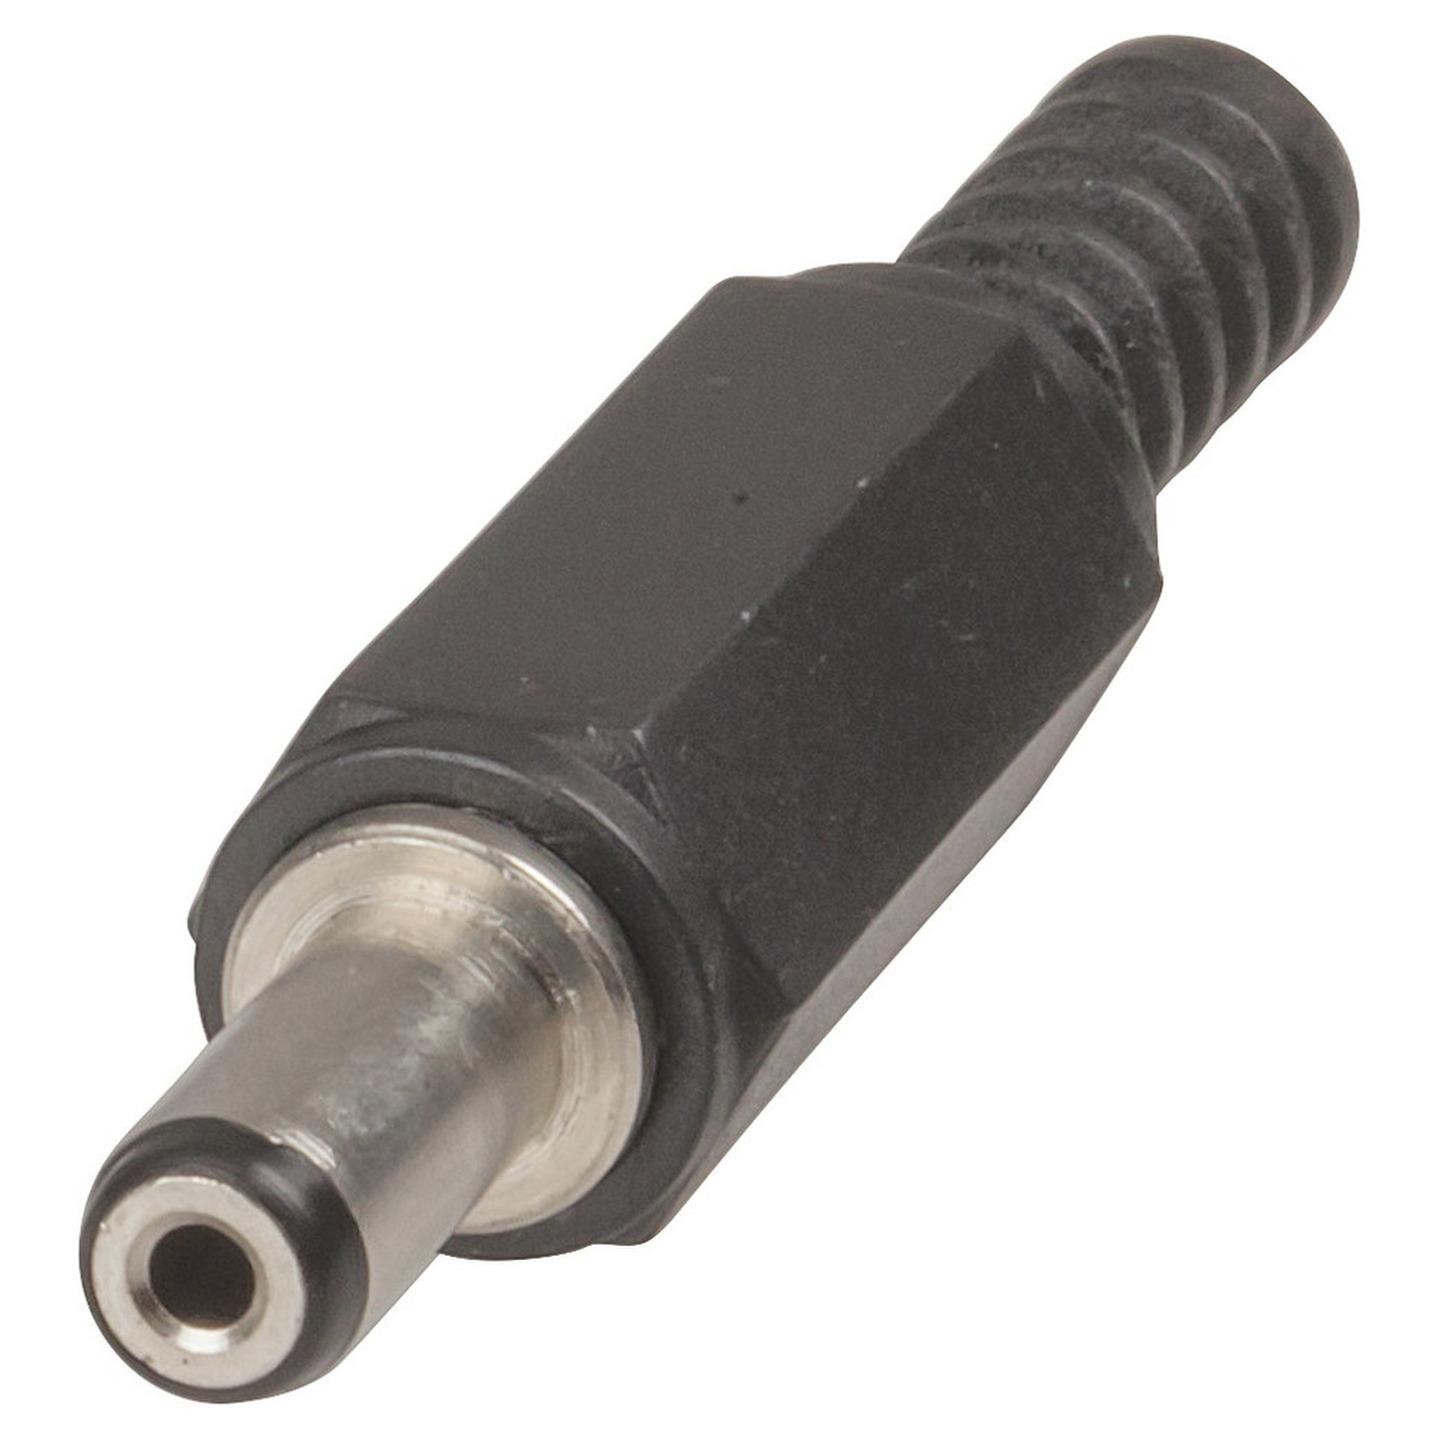 1.7mm DC Power Line Connector